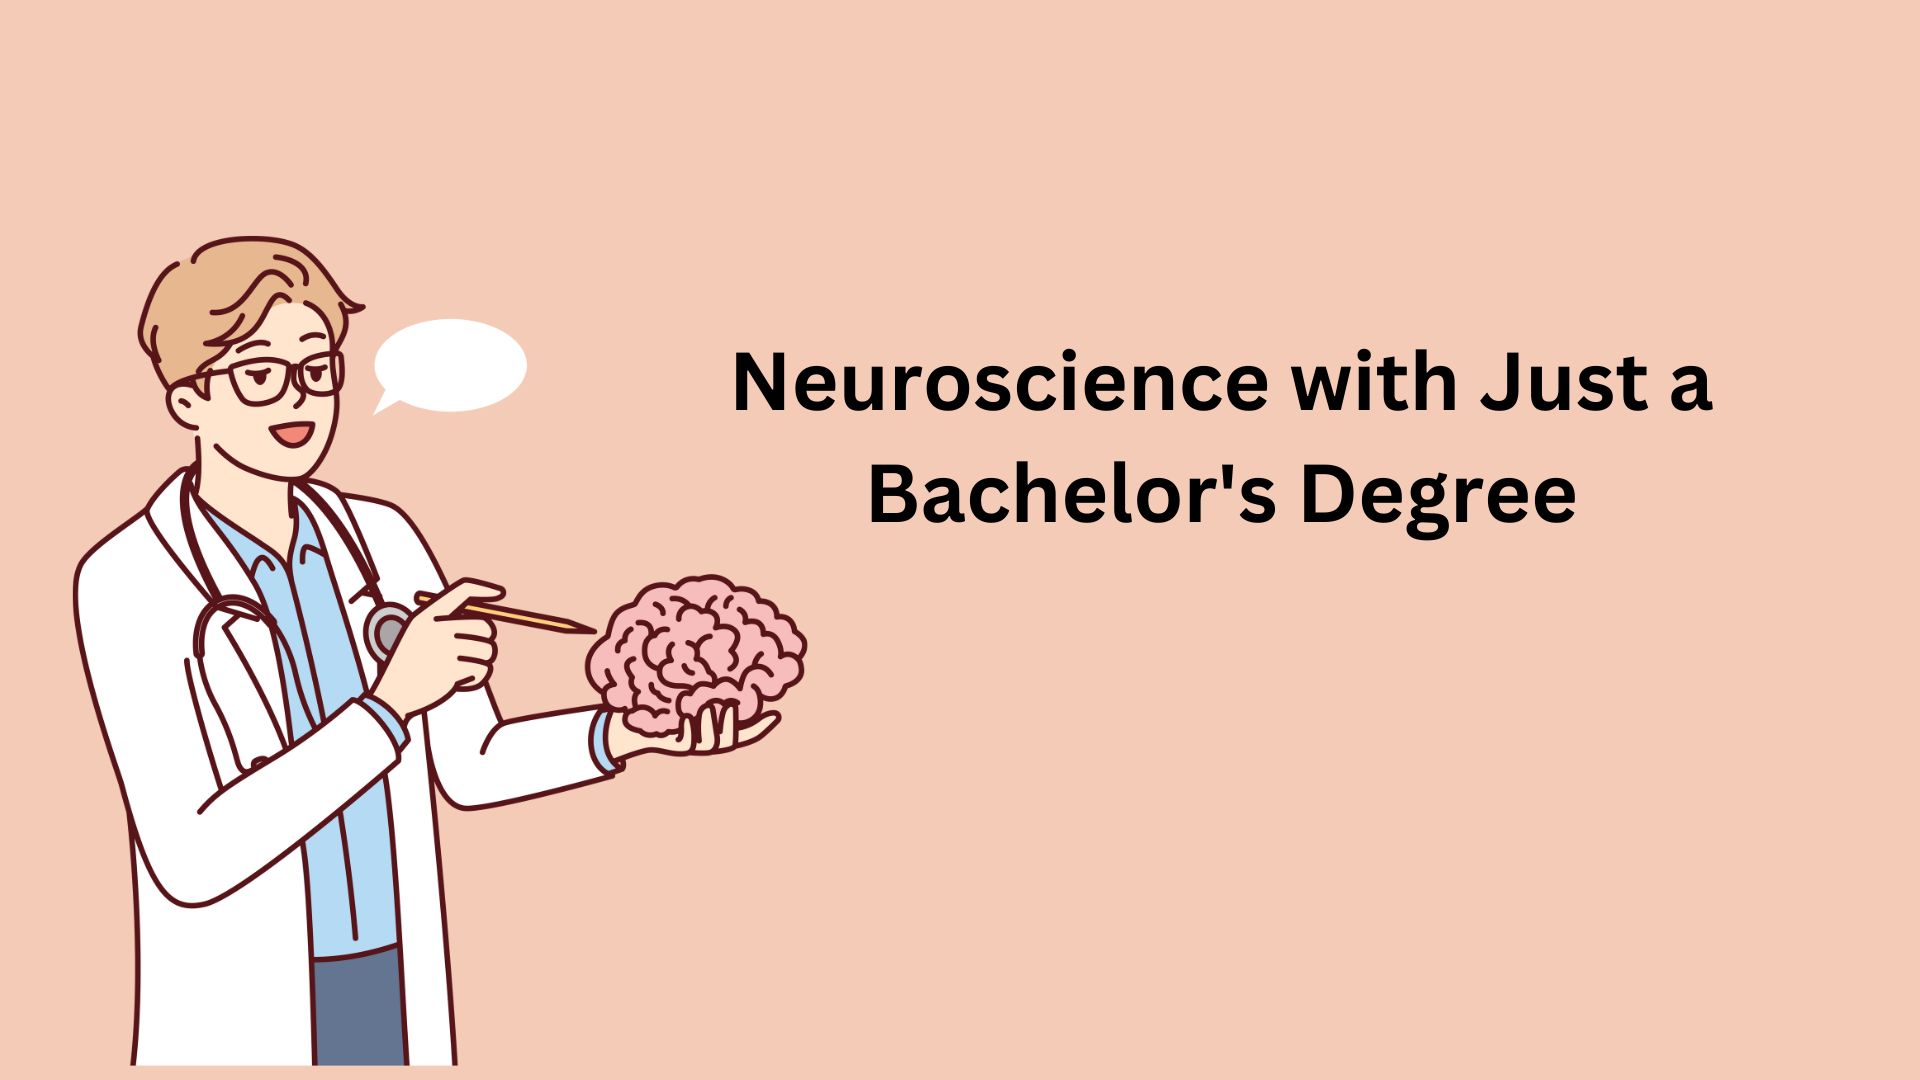 Neuroscience with Just a Bachelor's Degree